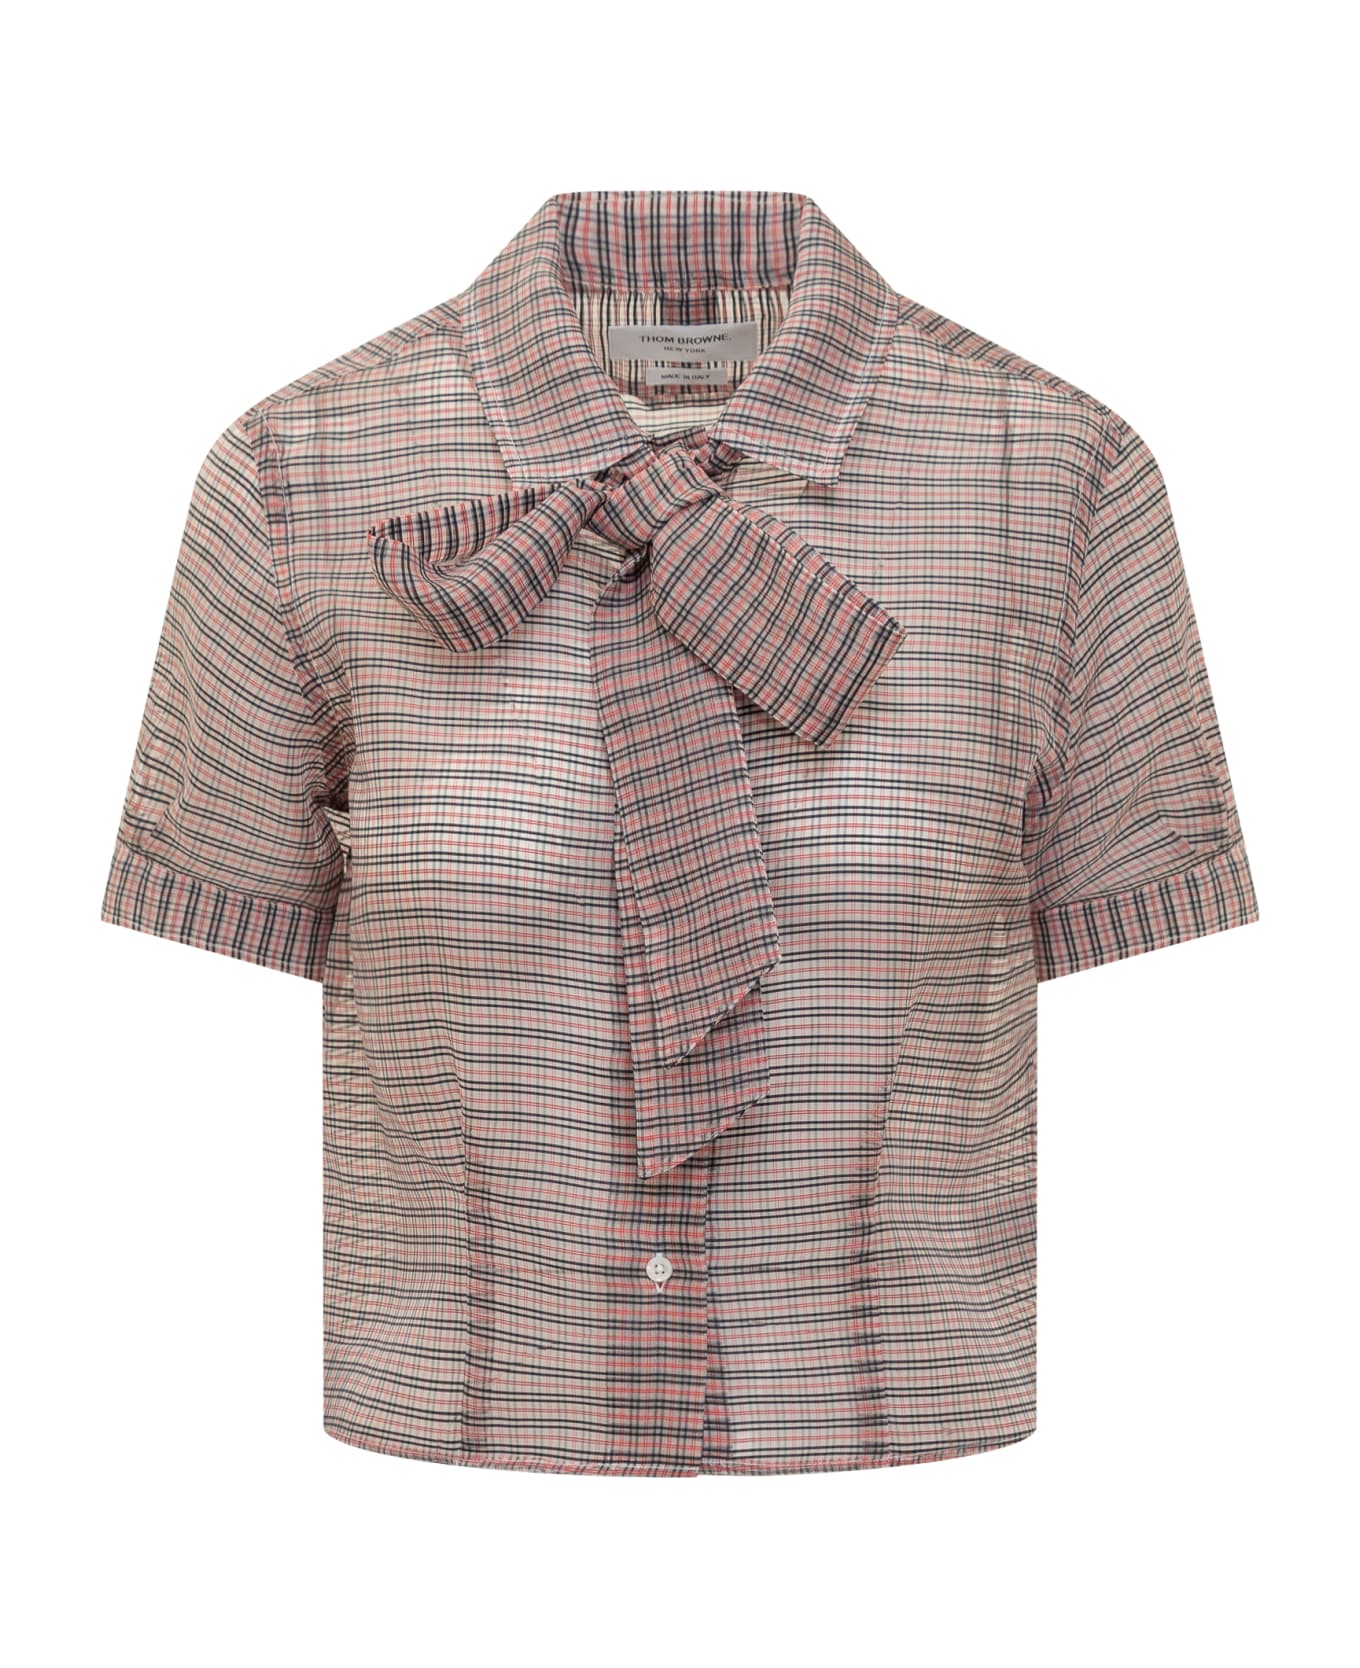 Thom Browne Tucked Check Blouse - RWBWHT